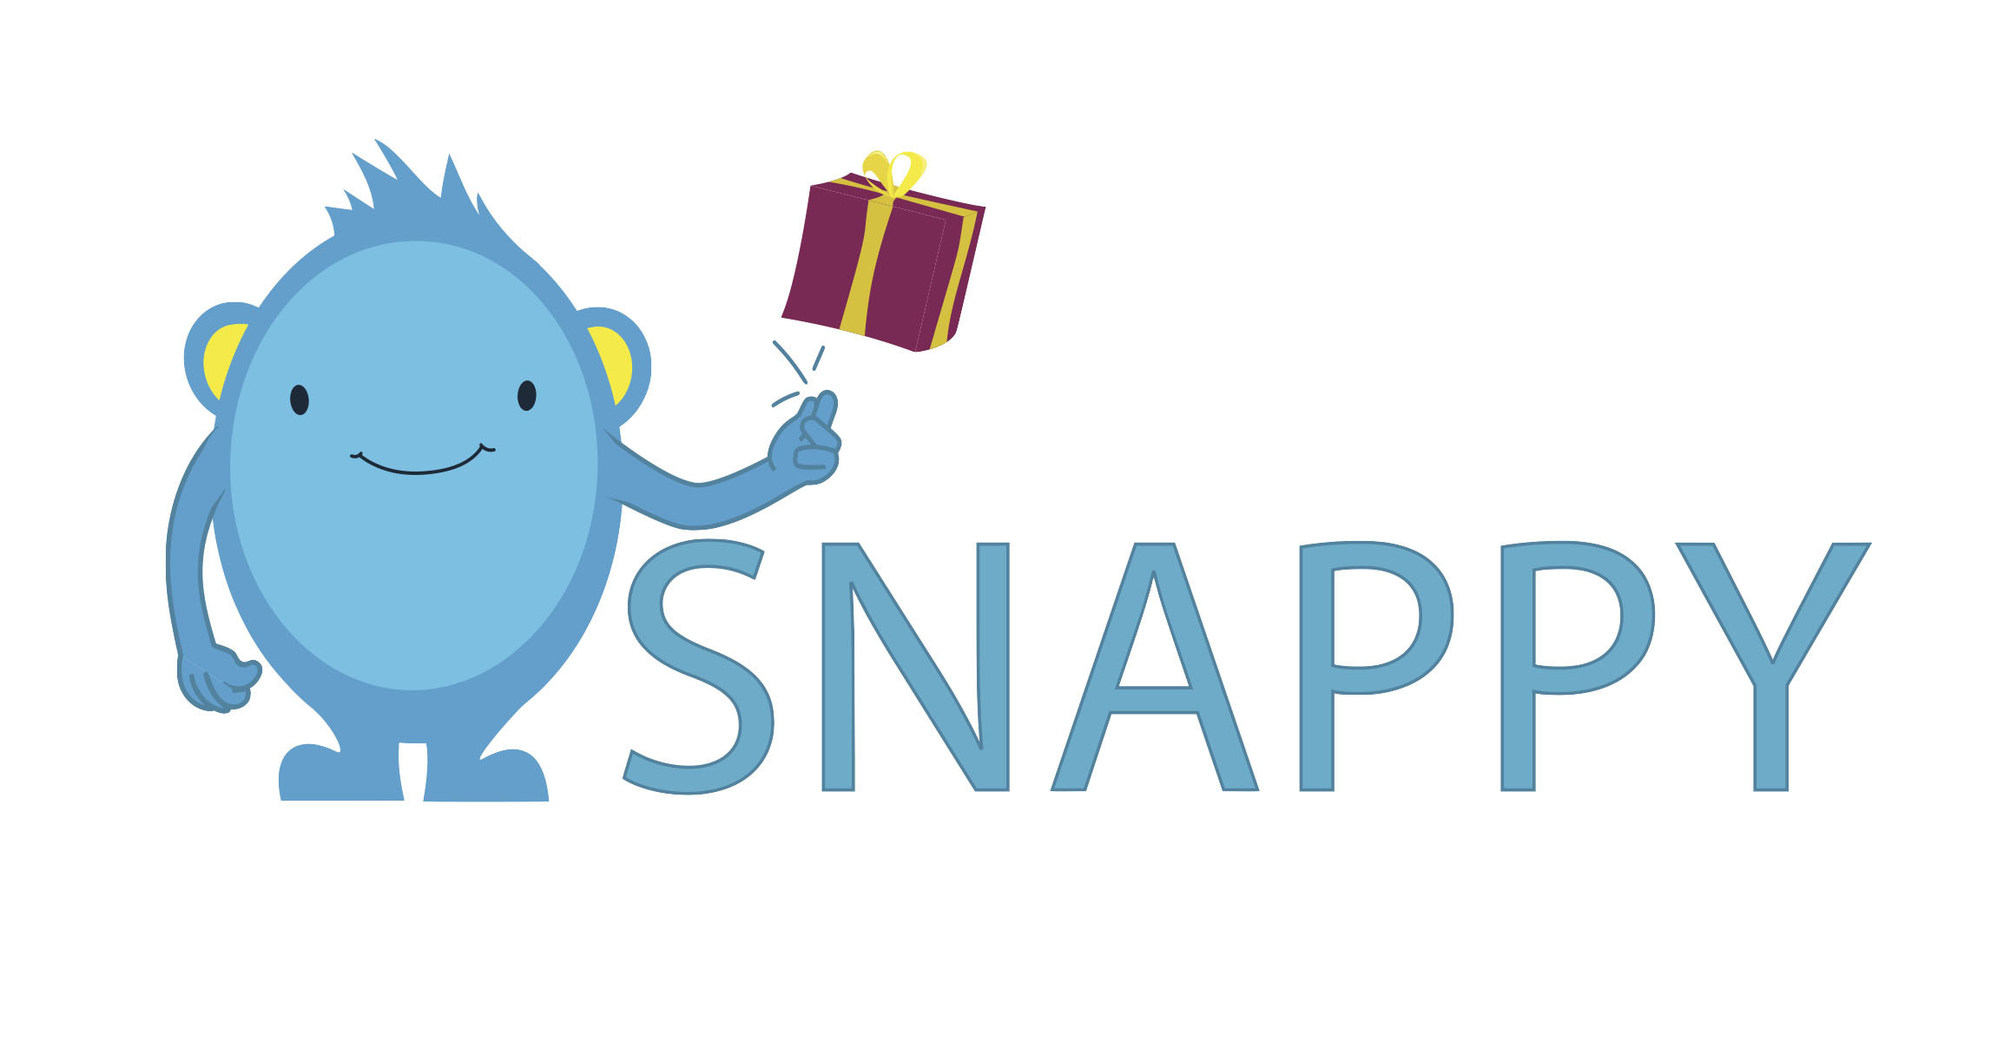 Snappy Gifts' Employee Happiness Survey Reveals More than 30% of People Feel Undervalued at Work Ahead of National Employee Appreciation Day